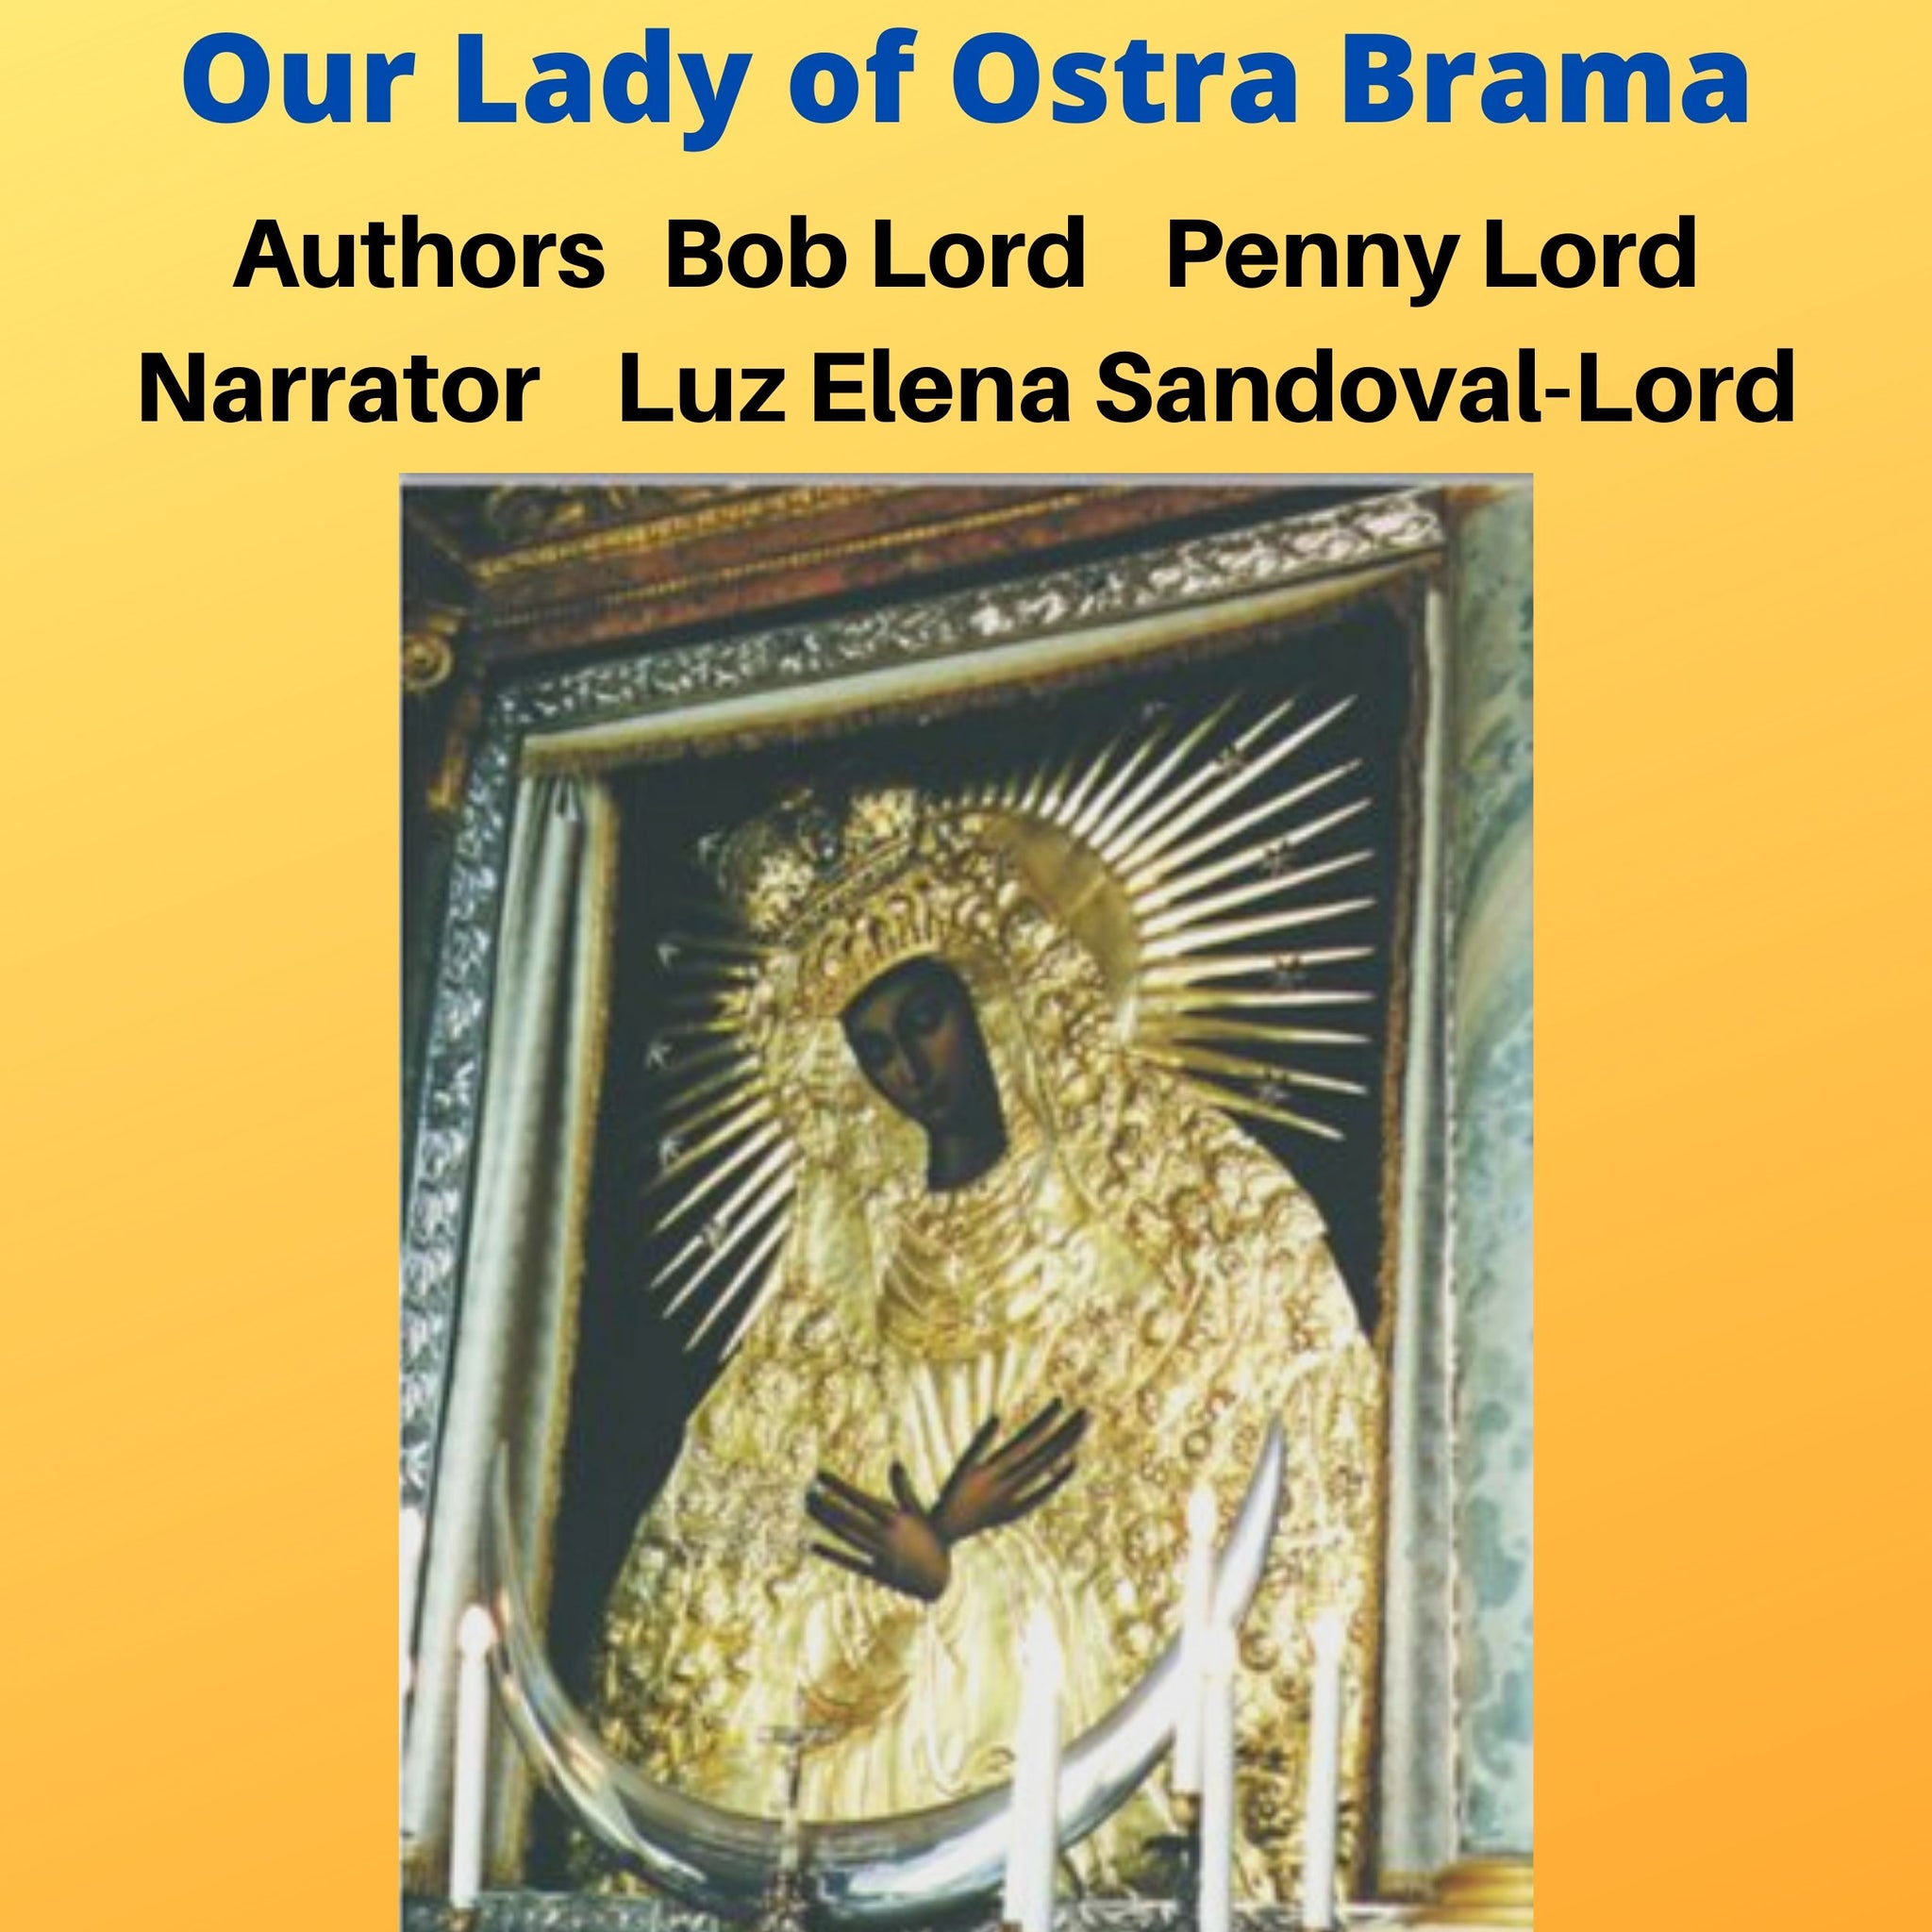 Our Lady of Ostra Brama Audiobook - Bob and Penny Lord